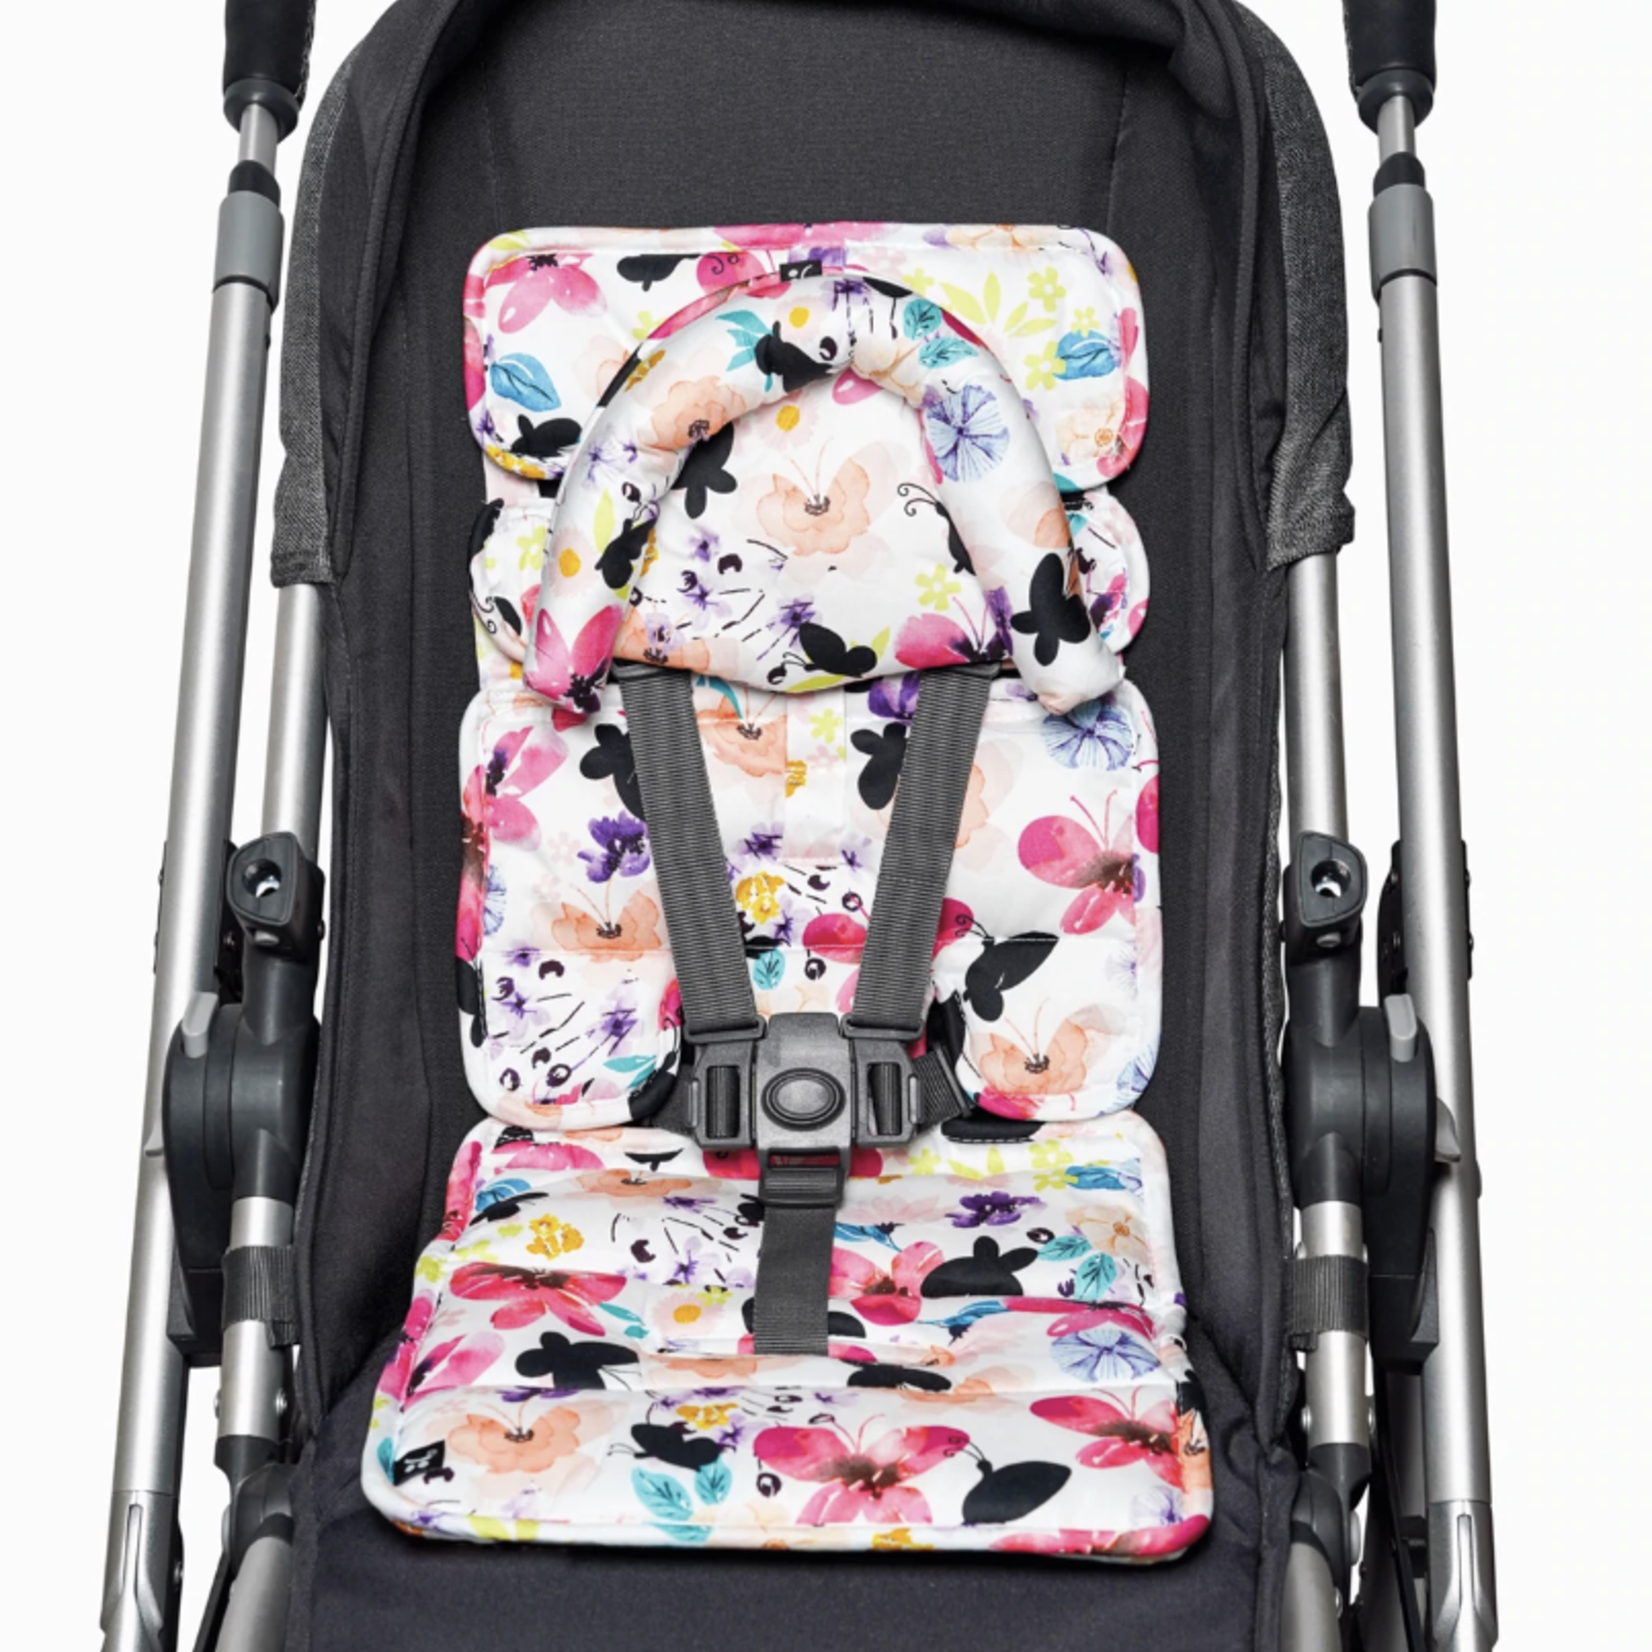 Outlookbaby Outlookbaby Pram Liner with built in head support - Floral Butterfly